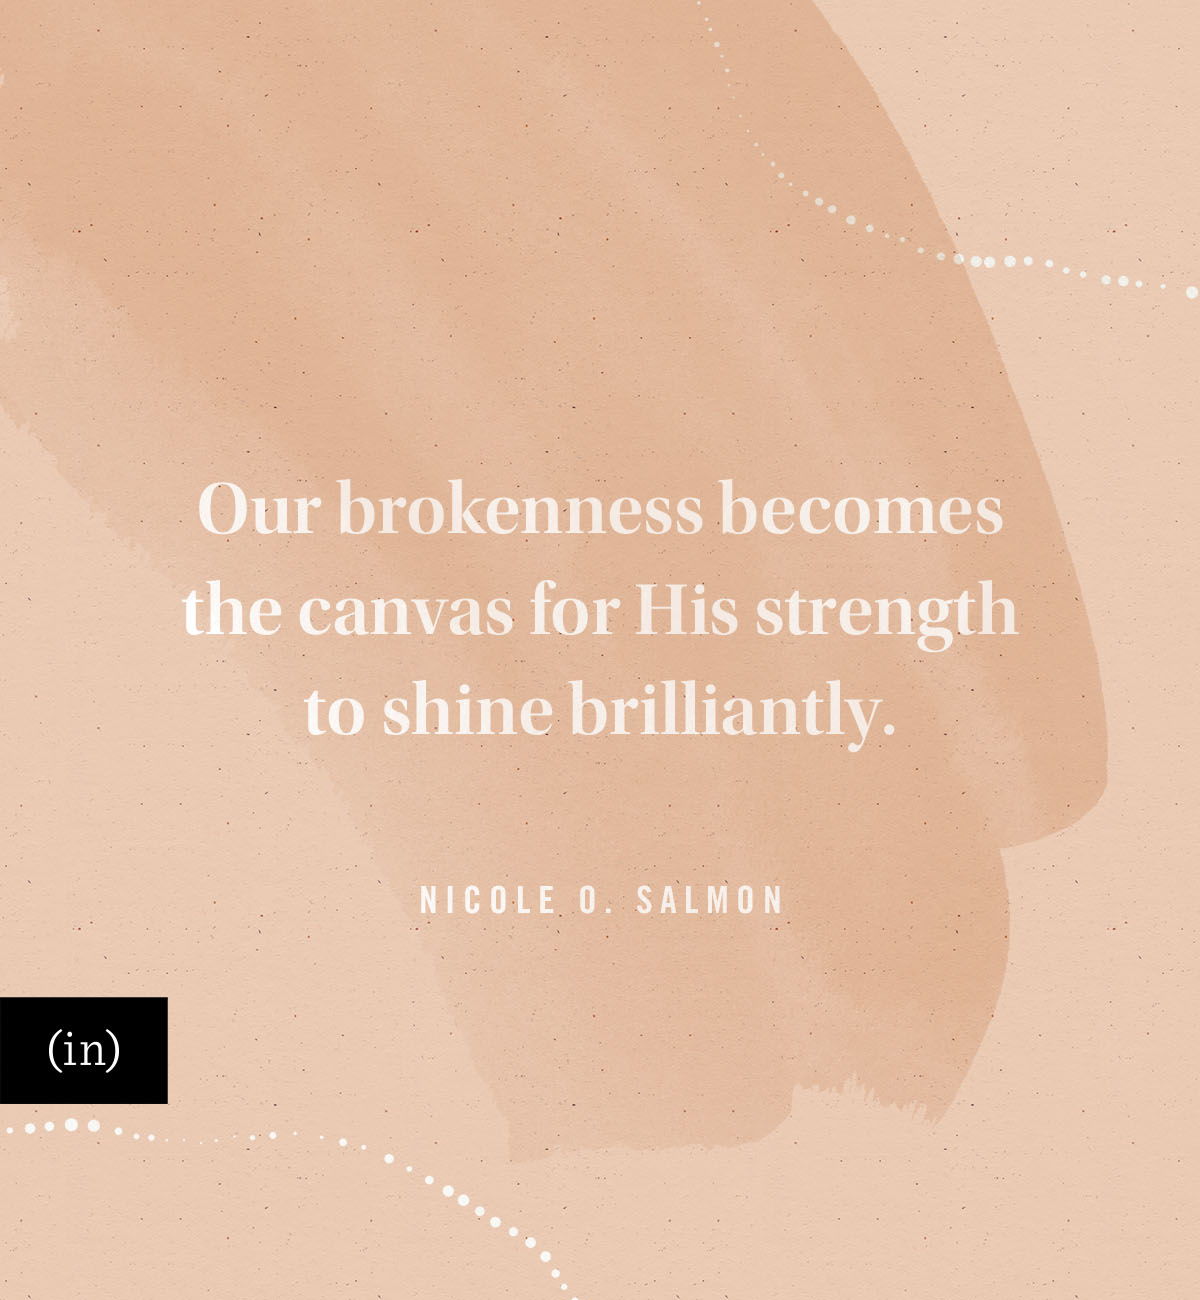 Our brokenness becomes the canvas for His strength to shine brilliantly. -Nicole O. Salmon